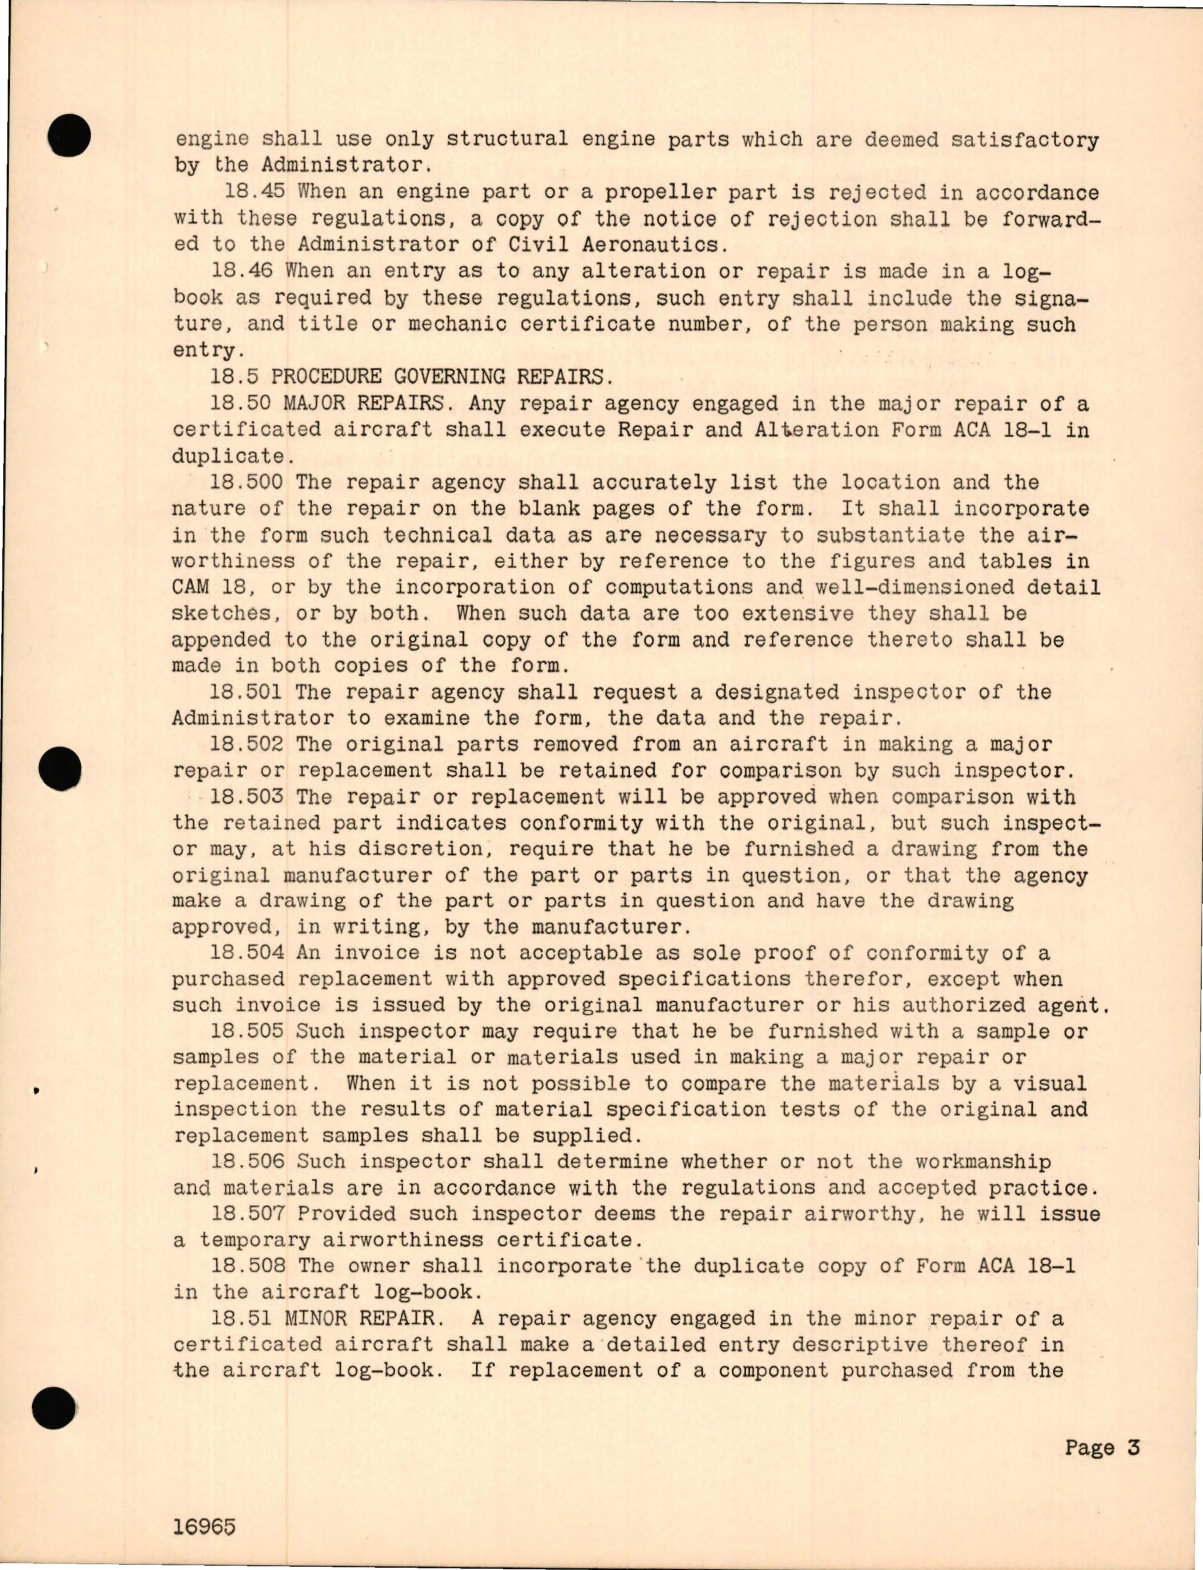 Sample page 5 from AirCorps Library document: Civil Air Regulations - Repair and Alteration of Aircraft